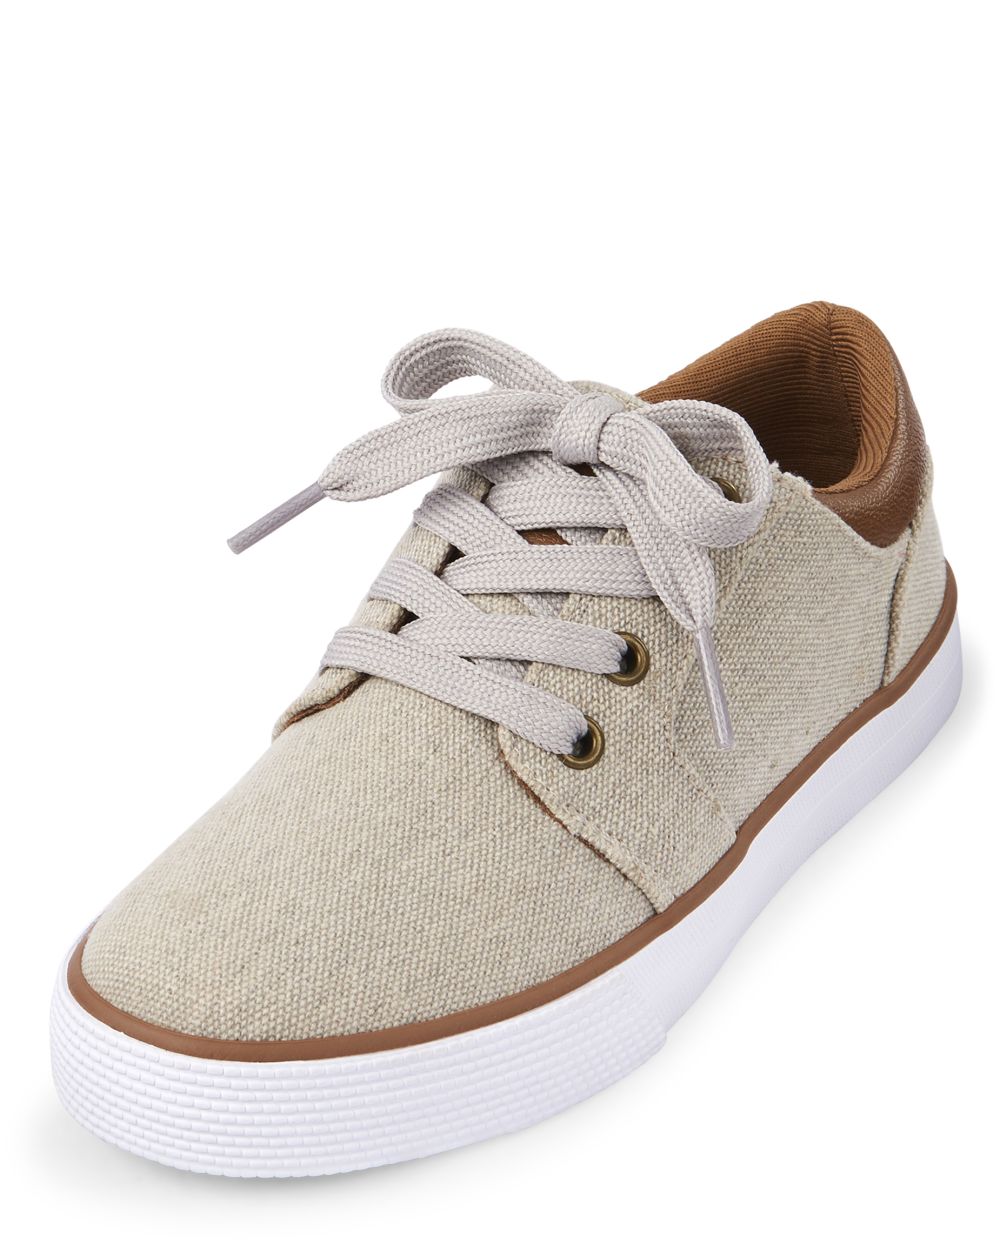 Boys Easter Matching Canvas Sneakers